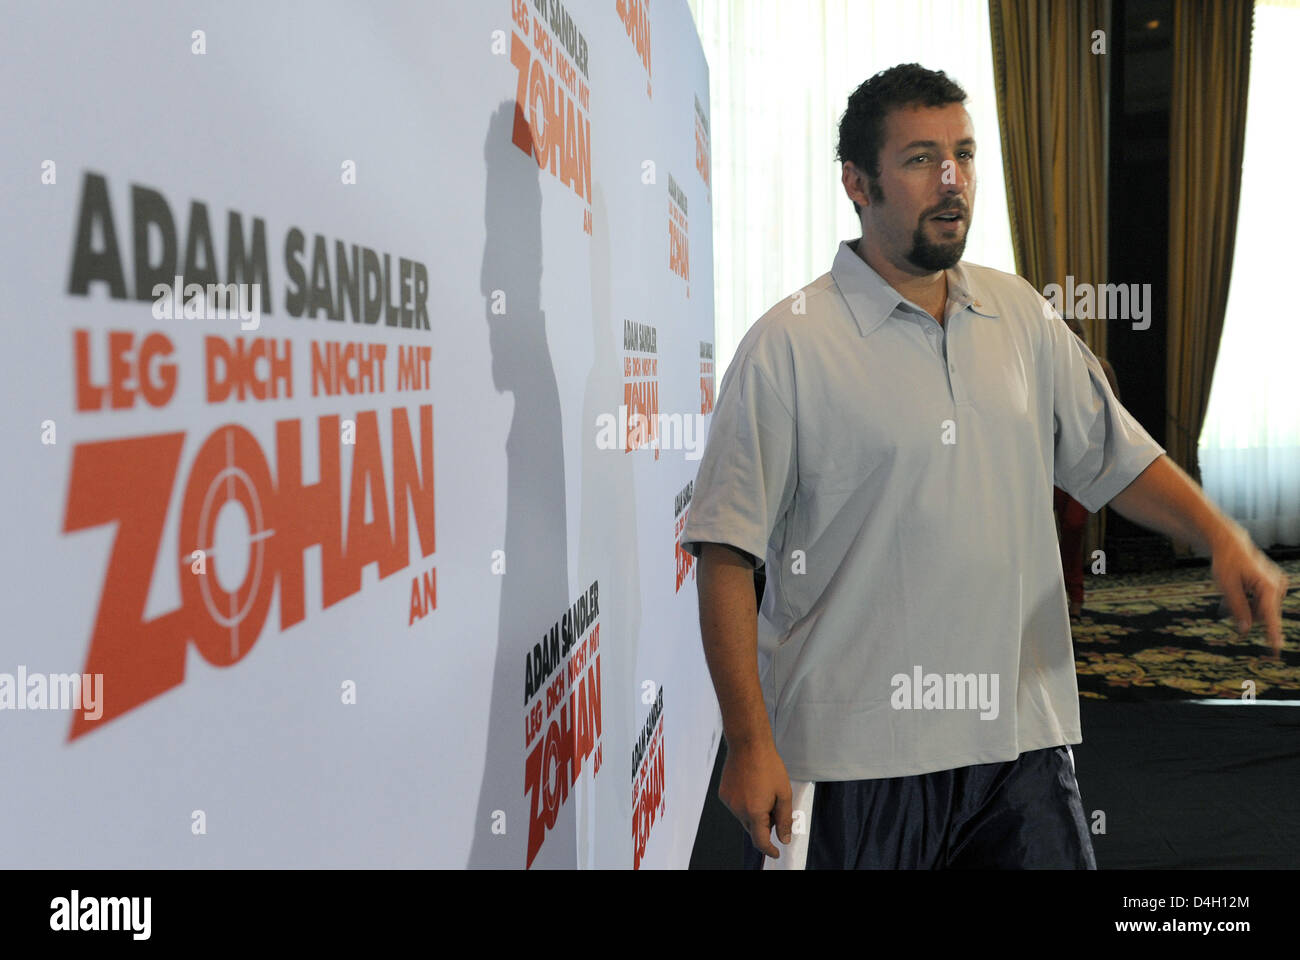 US actor Adam Sandler pictured during a photo call in Berlin, Germany, 28  July 2008. His new film 'Leg Dich nicht mit Zohan an' (original title: 'You  don't mess with the Zohan')